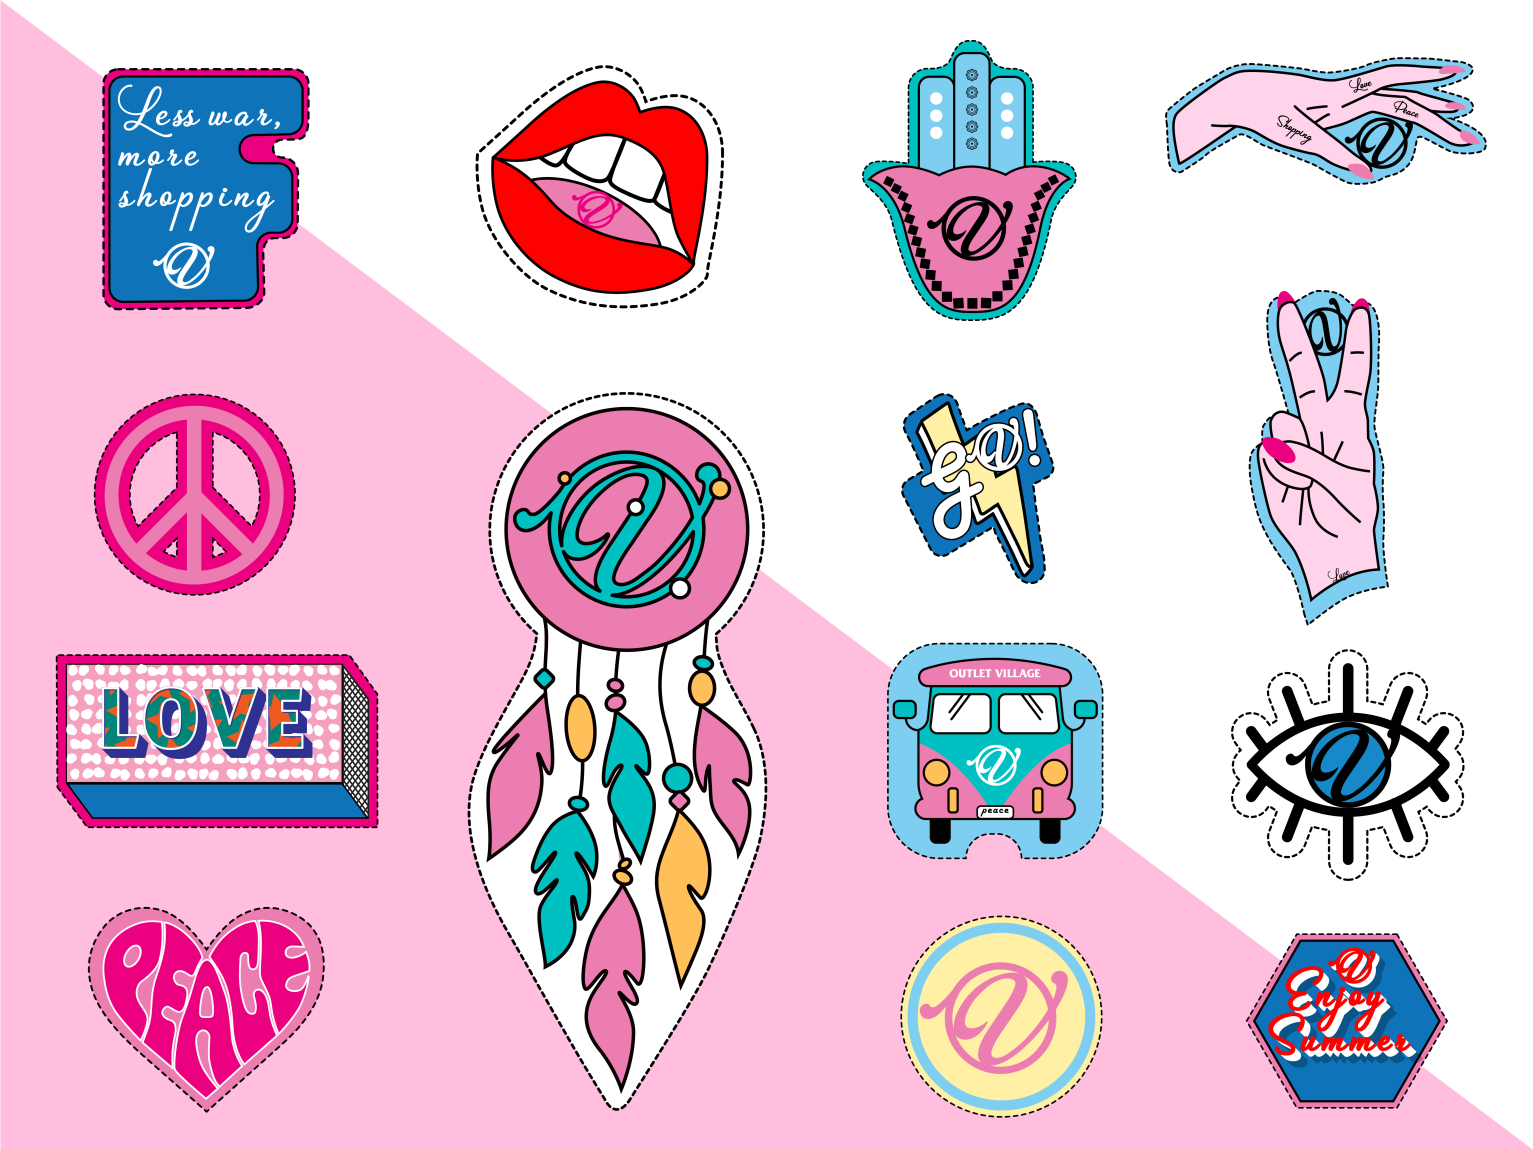 hippie patches for collaboration with jeans trailer by Anna Gromova on ...